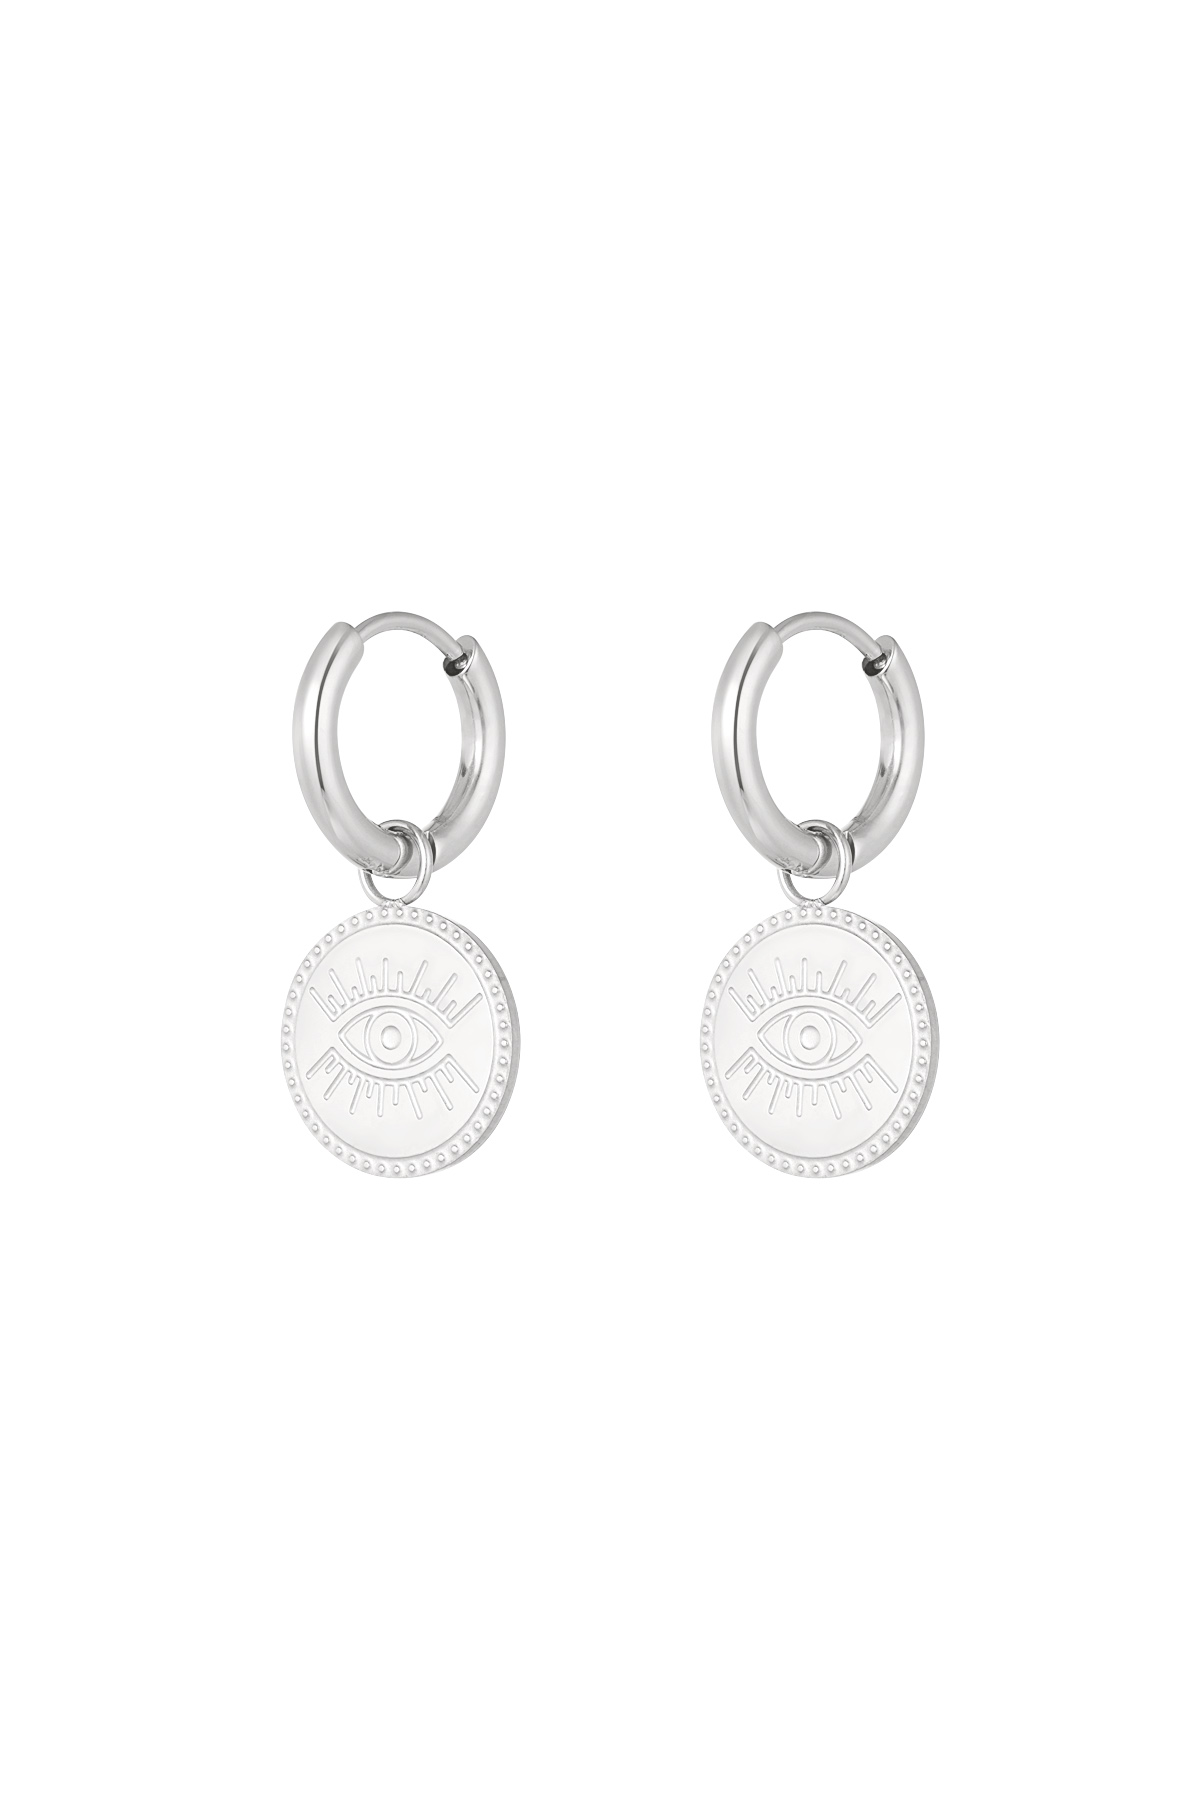 Minimalist round earrings with eye - silver